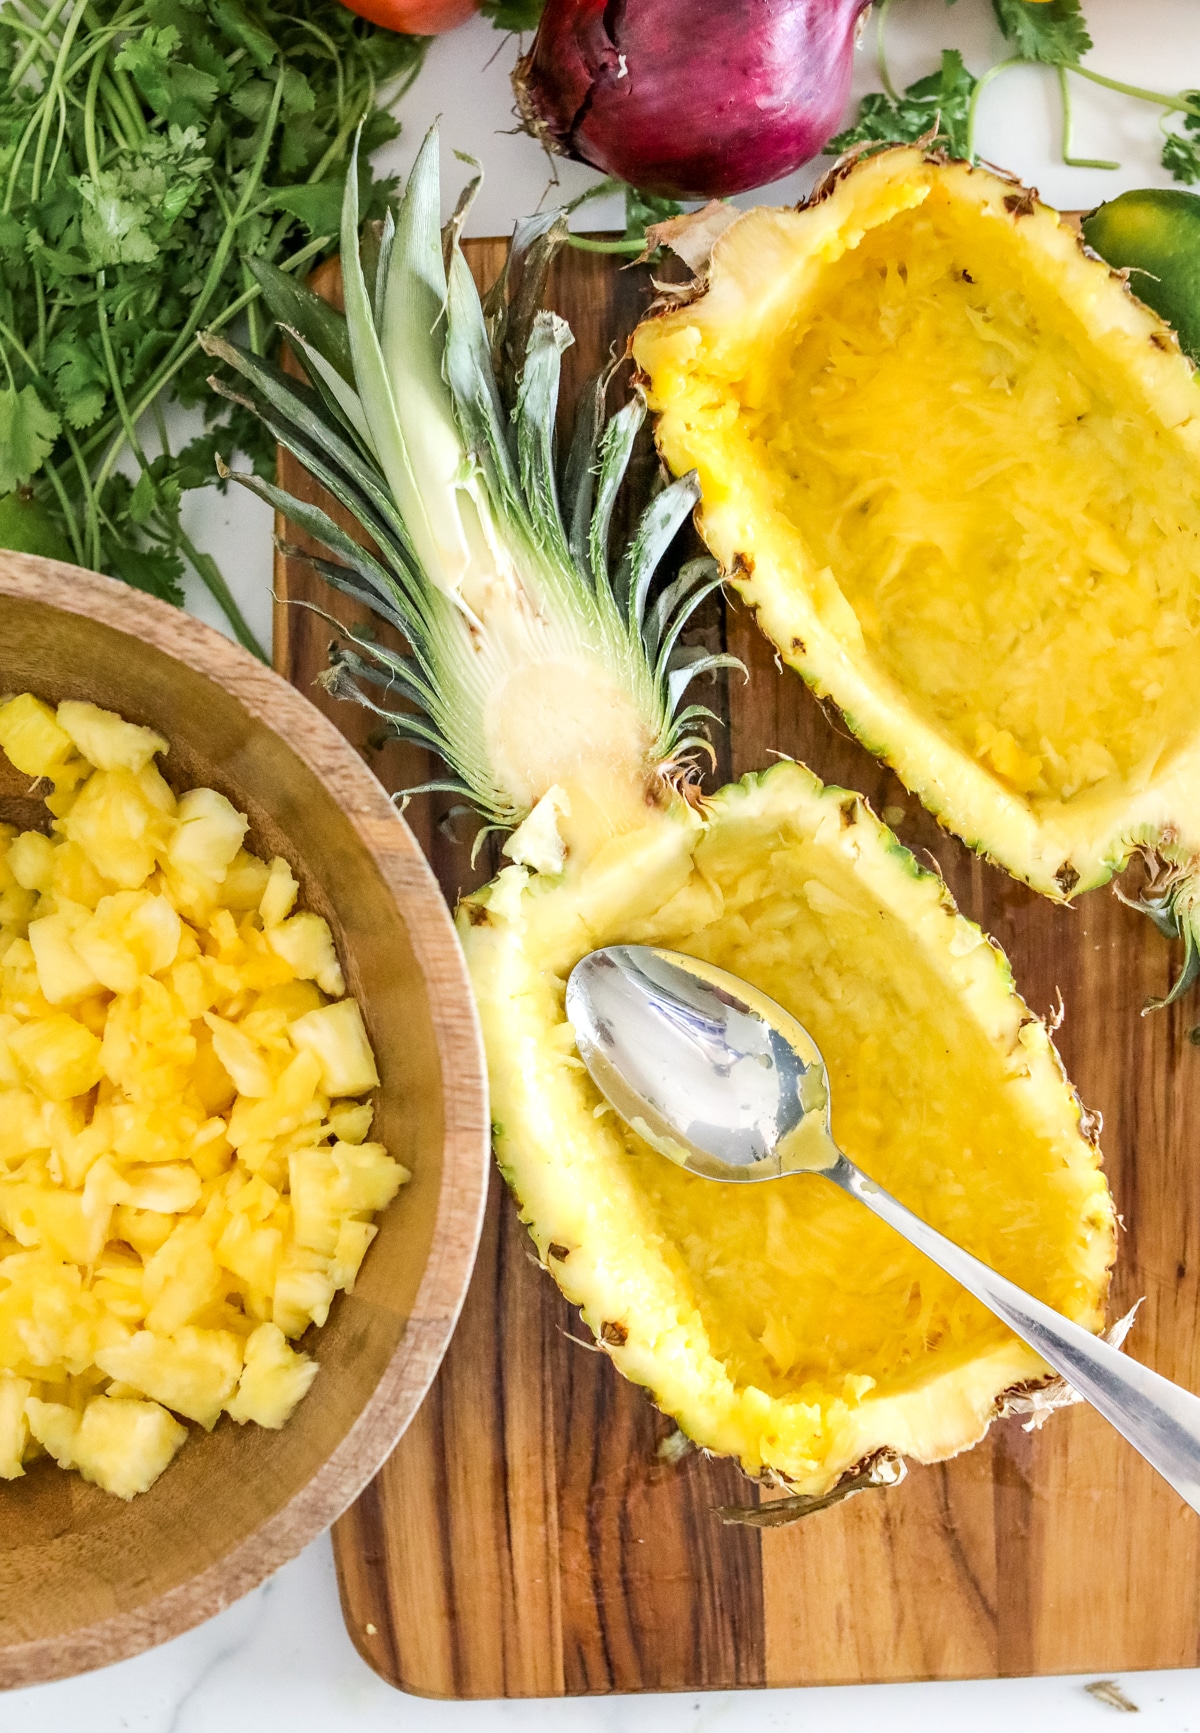 Evenly scoop out pineapple bowls